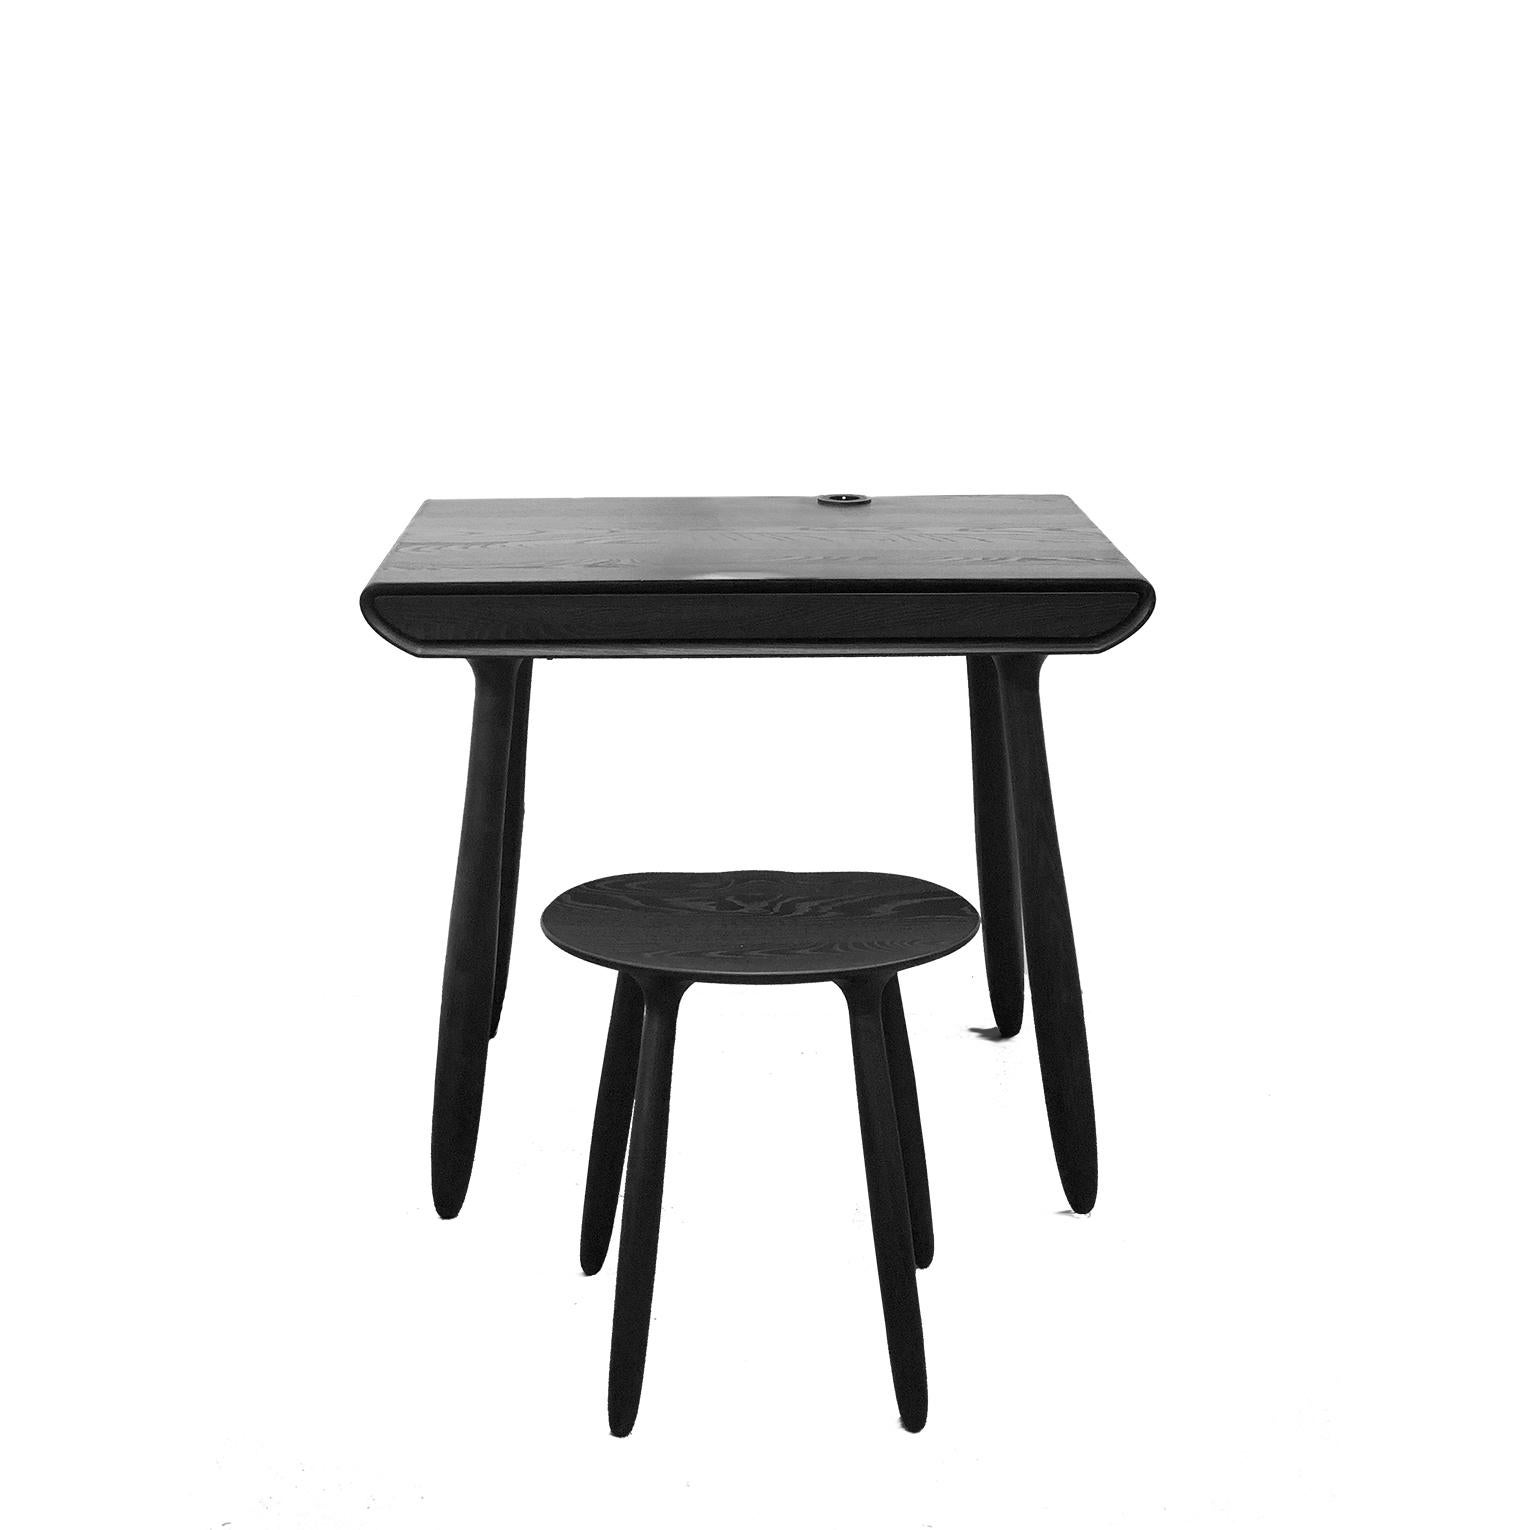 Latvian Black Stained Ash Daiku Vanity Table by Victoria Magniant